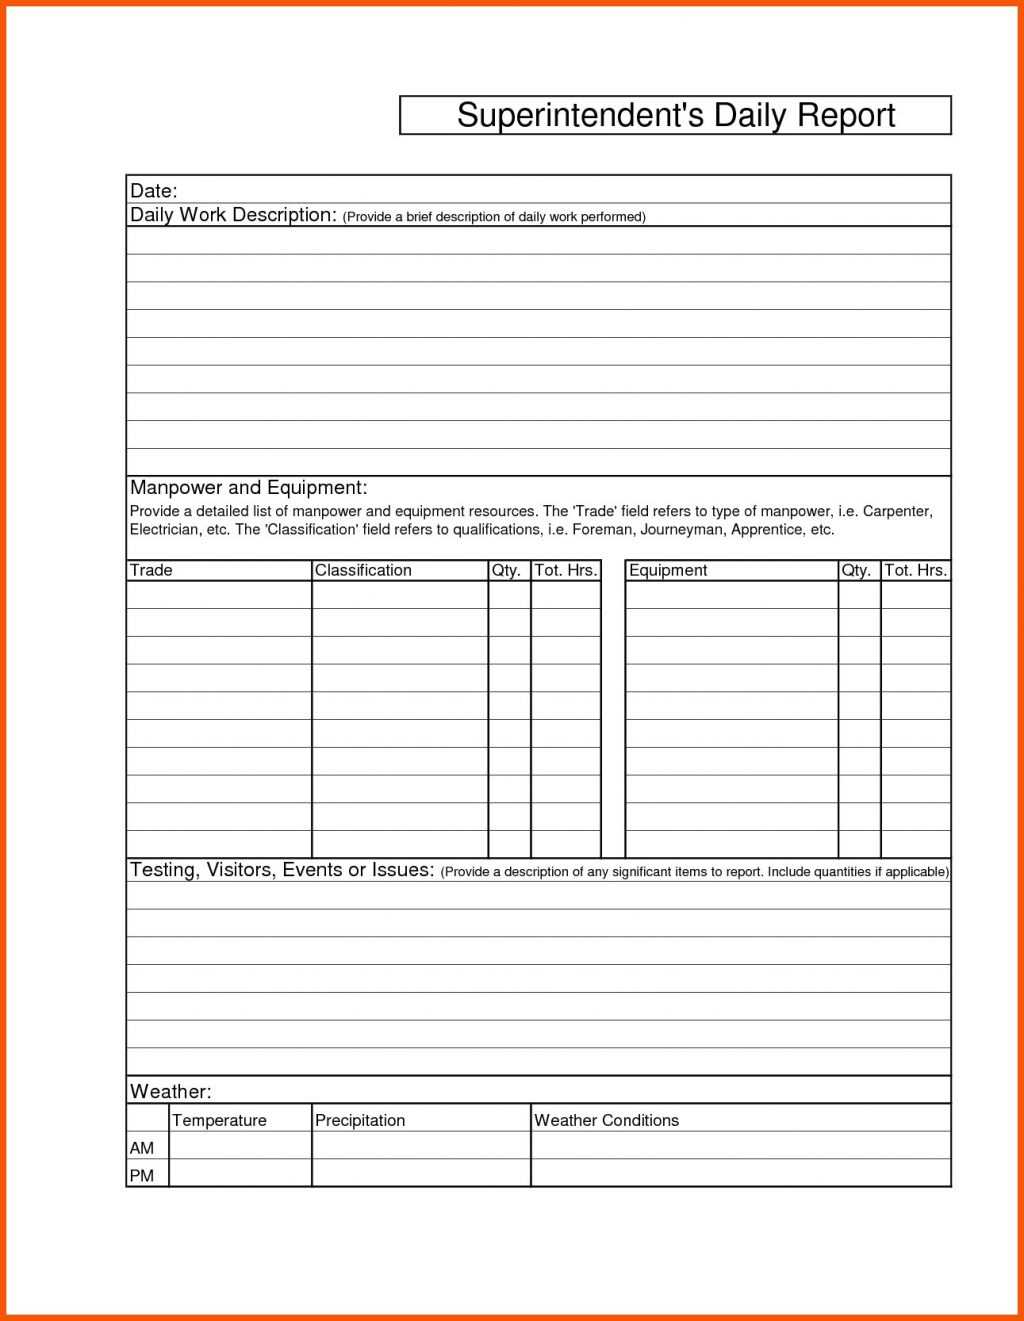 021 Construction Project Daily Report Format Templatedeas With Employee Daily Report Template